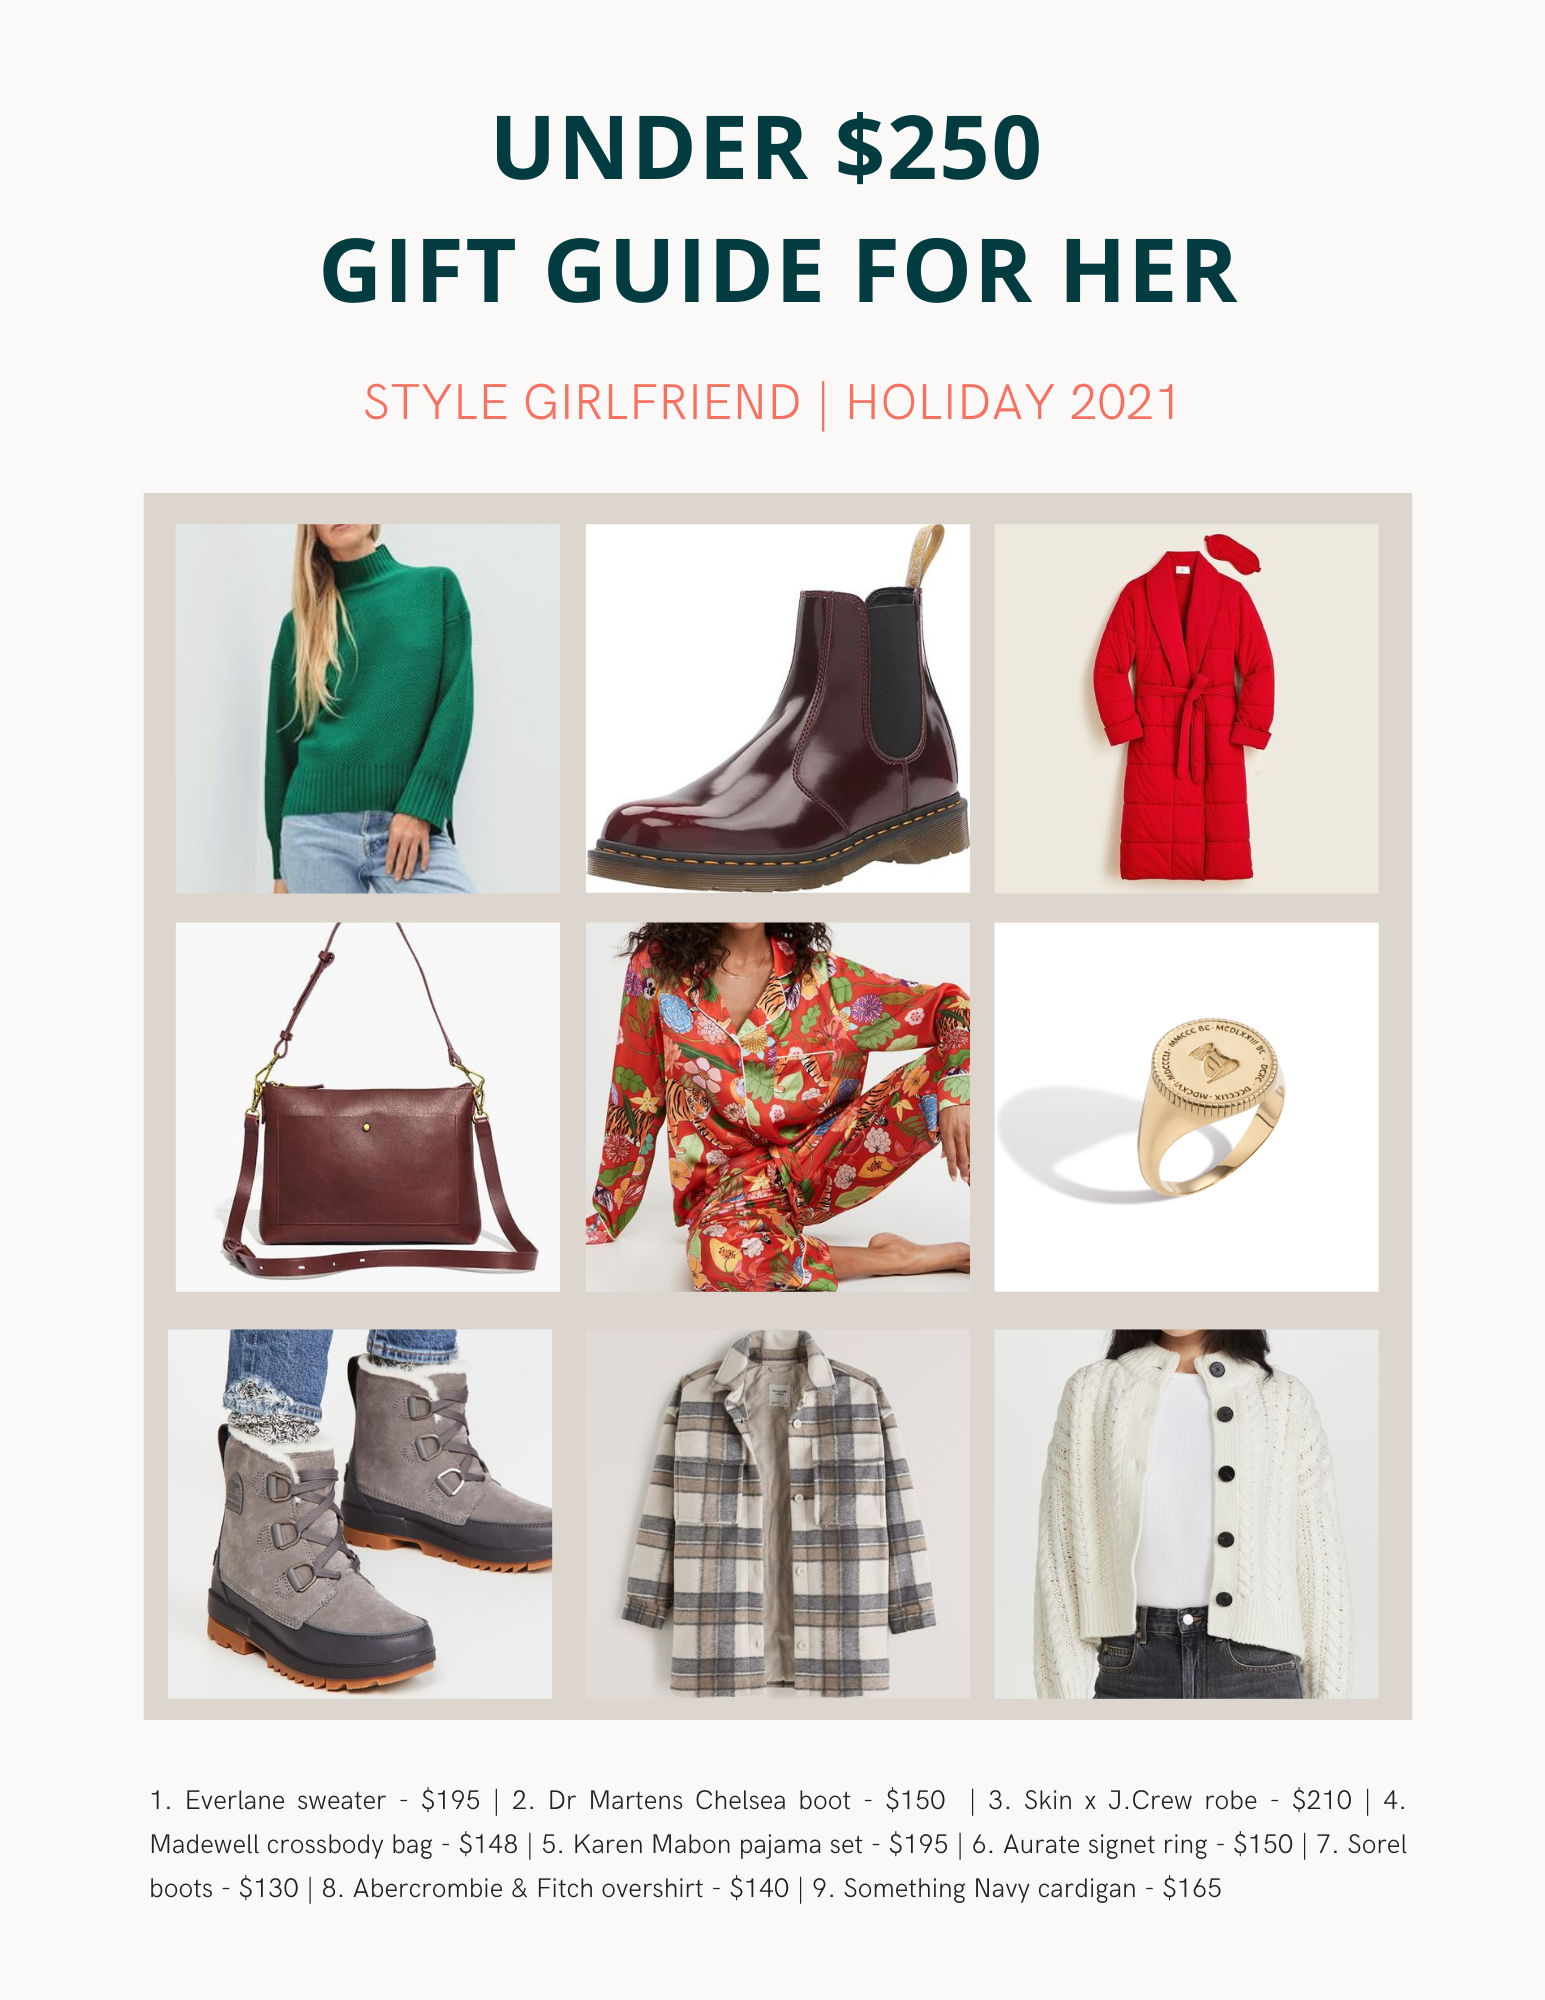 gifts under $250 for her